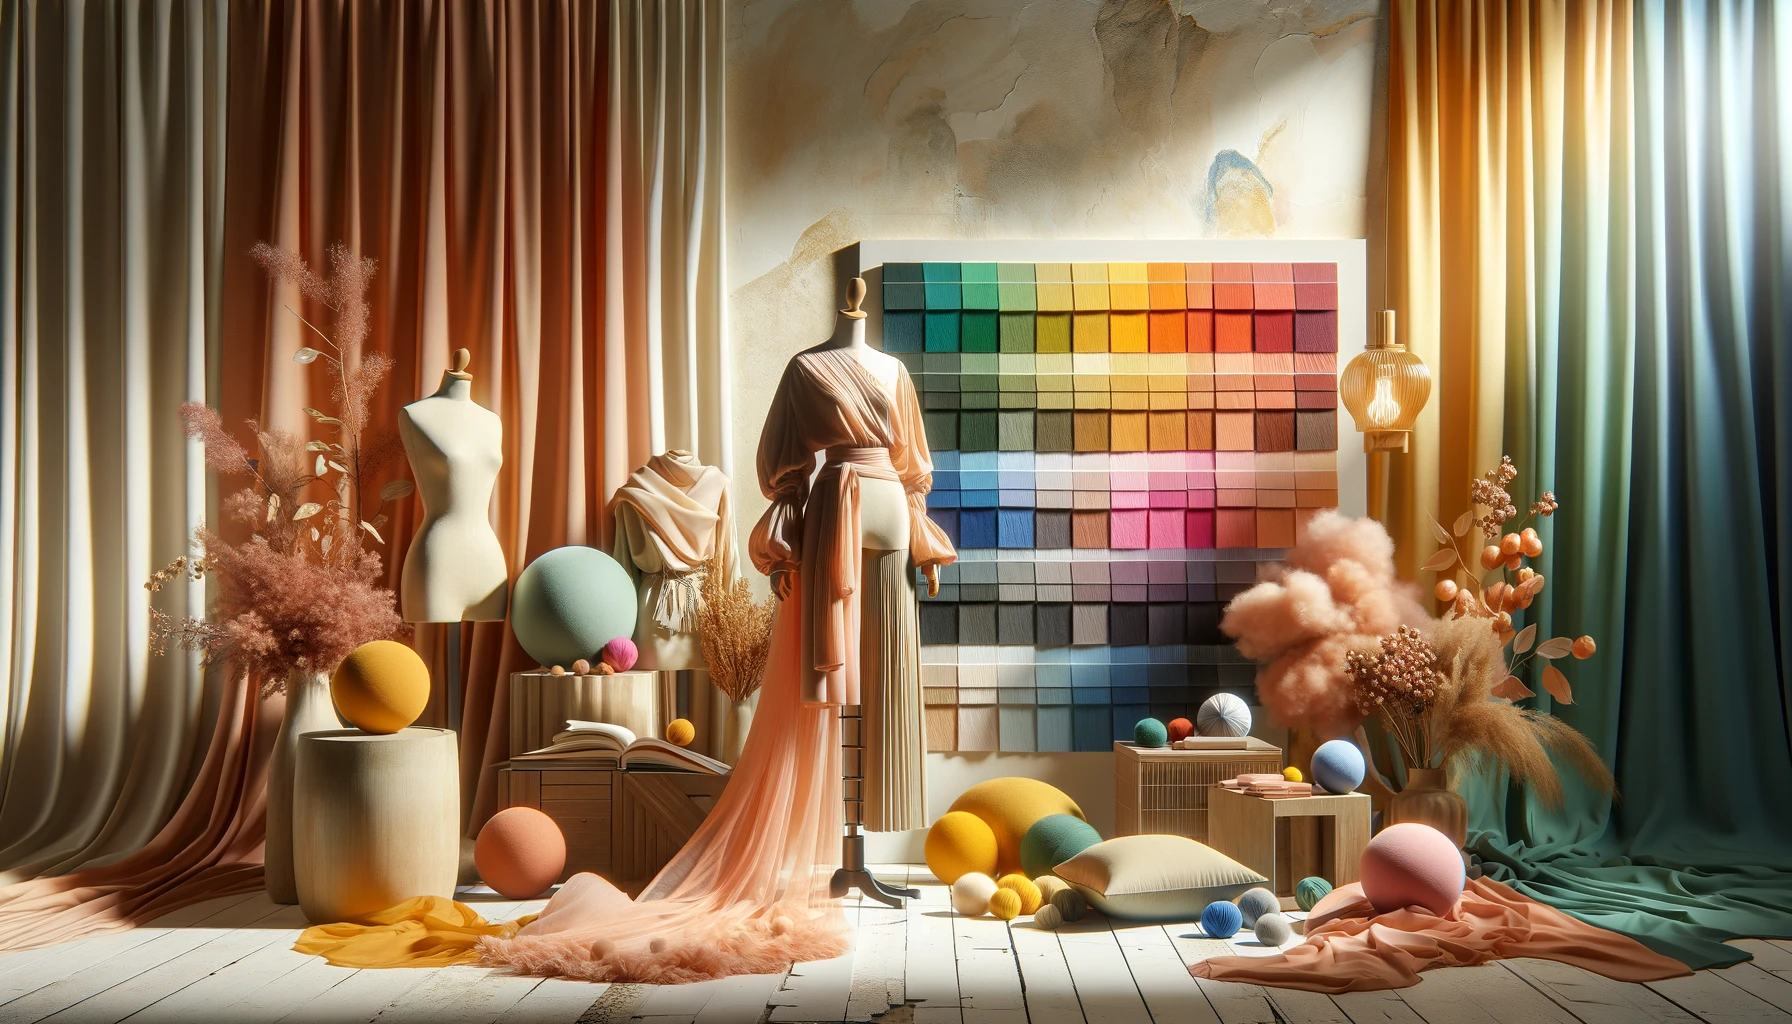 Artistic display of 2024's fashion color palette with fabrics in Peach Fuzz, vivid colors, and pastels draped over forms.